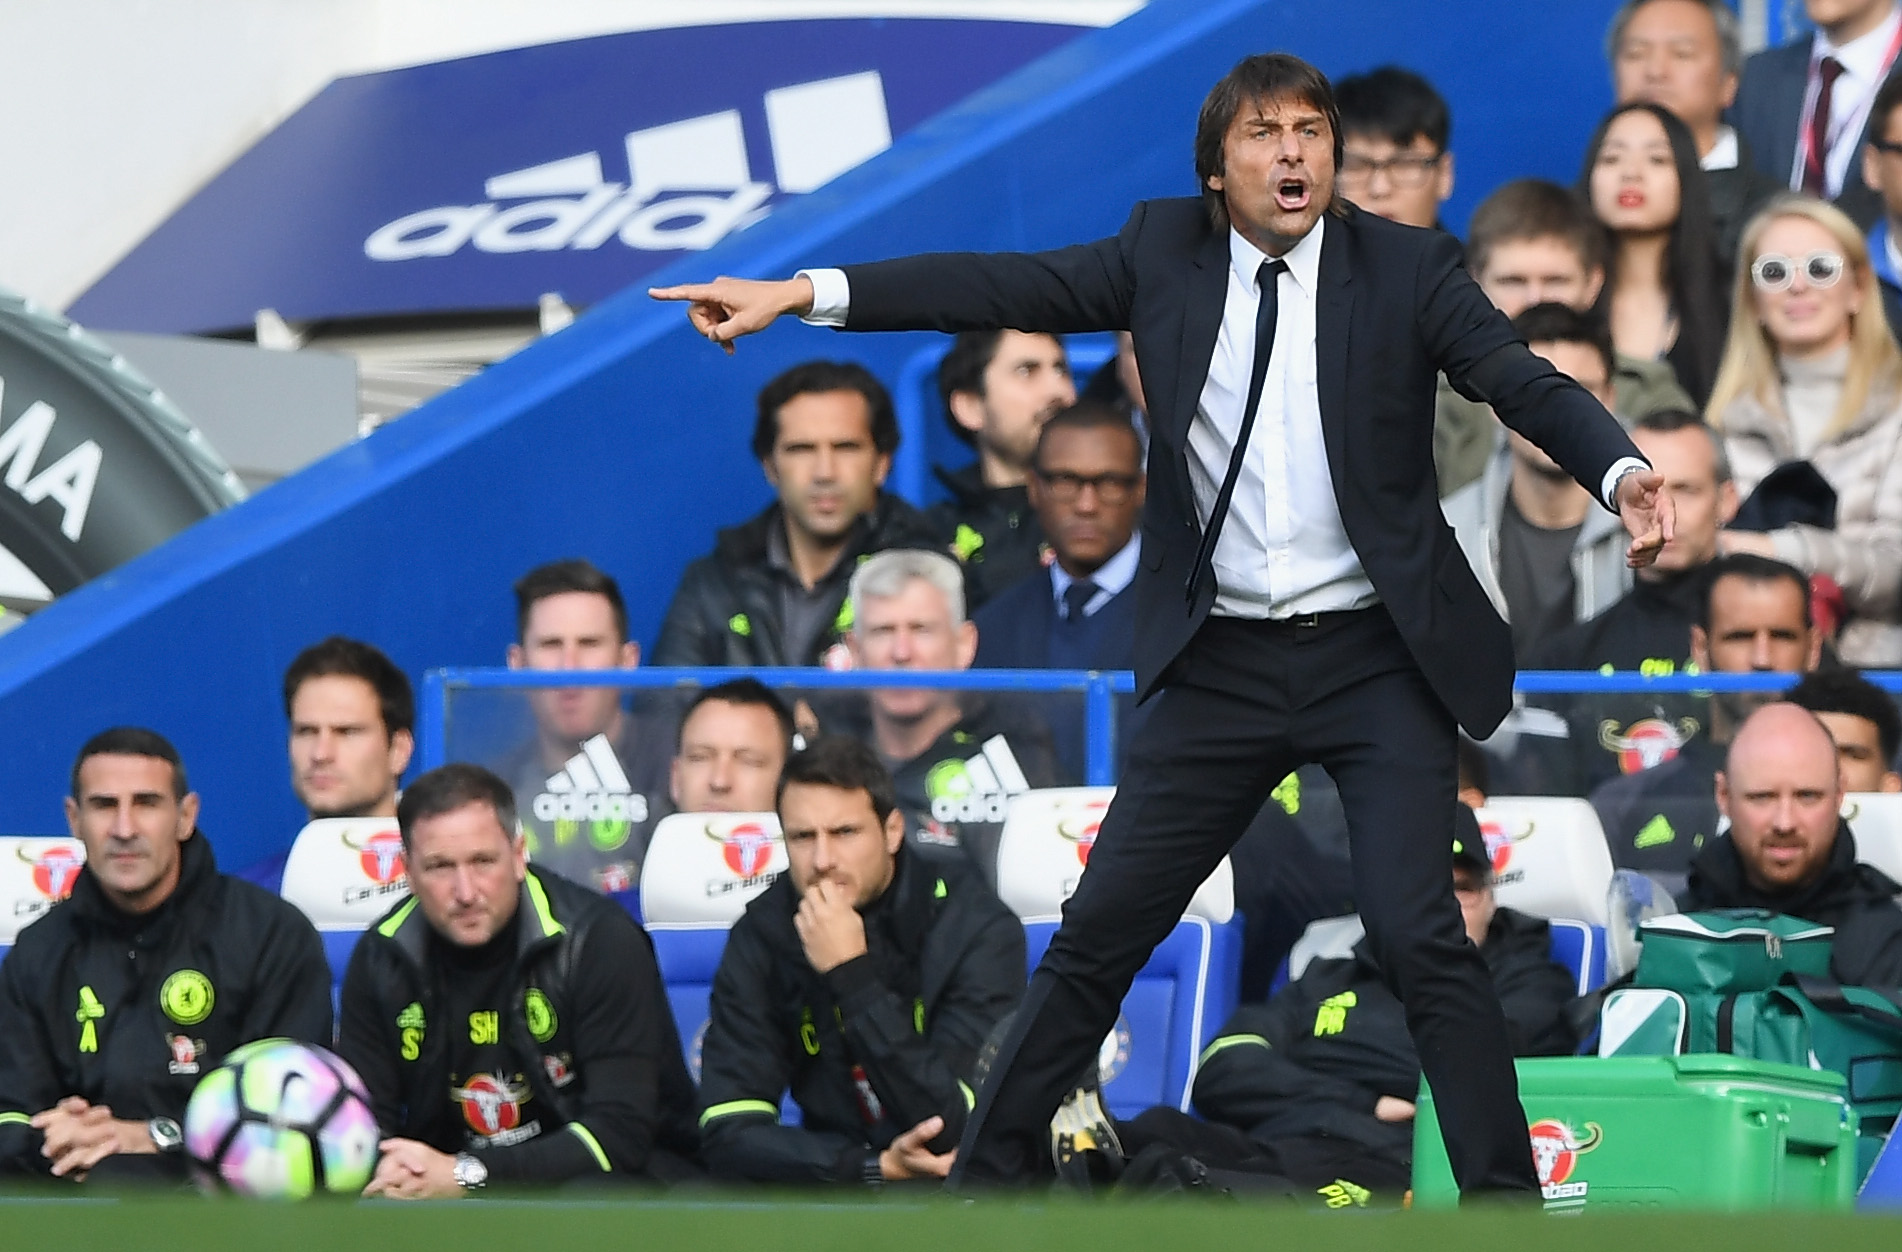 Antonio Conte named LMA's Manager of the Year